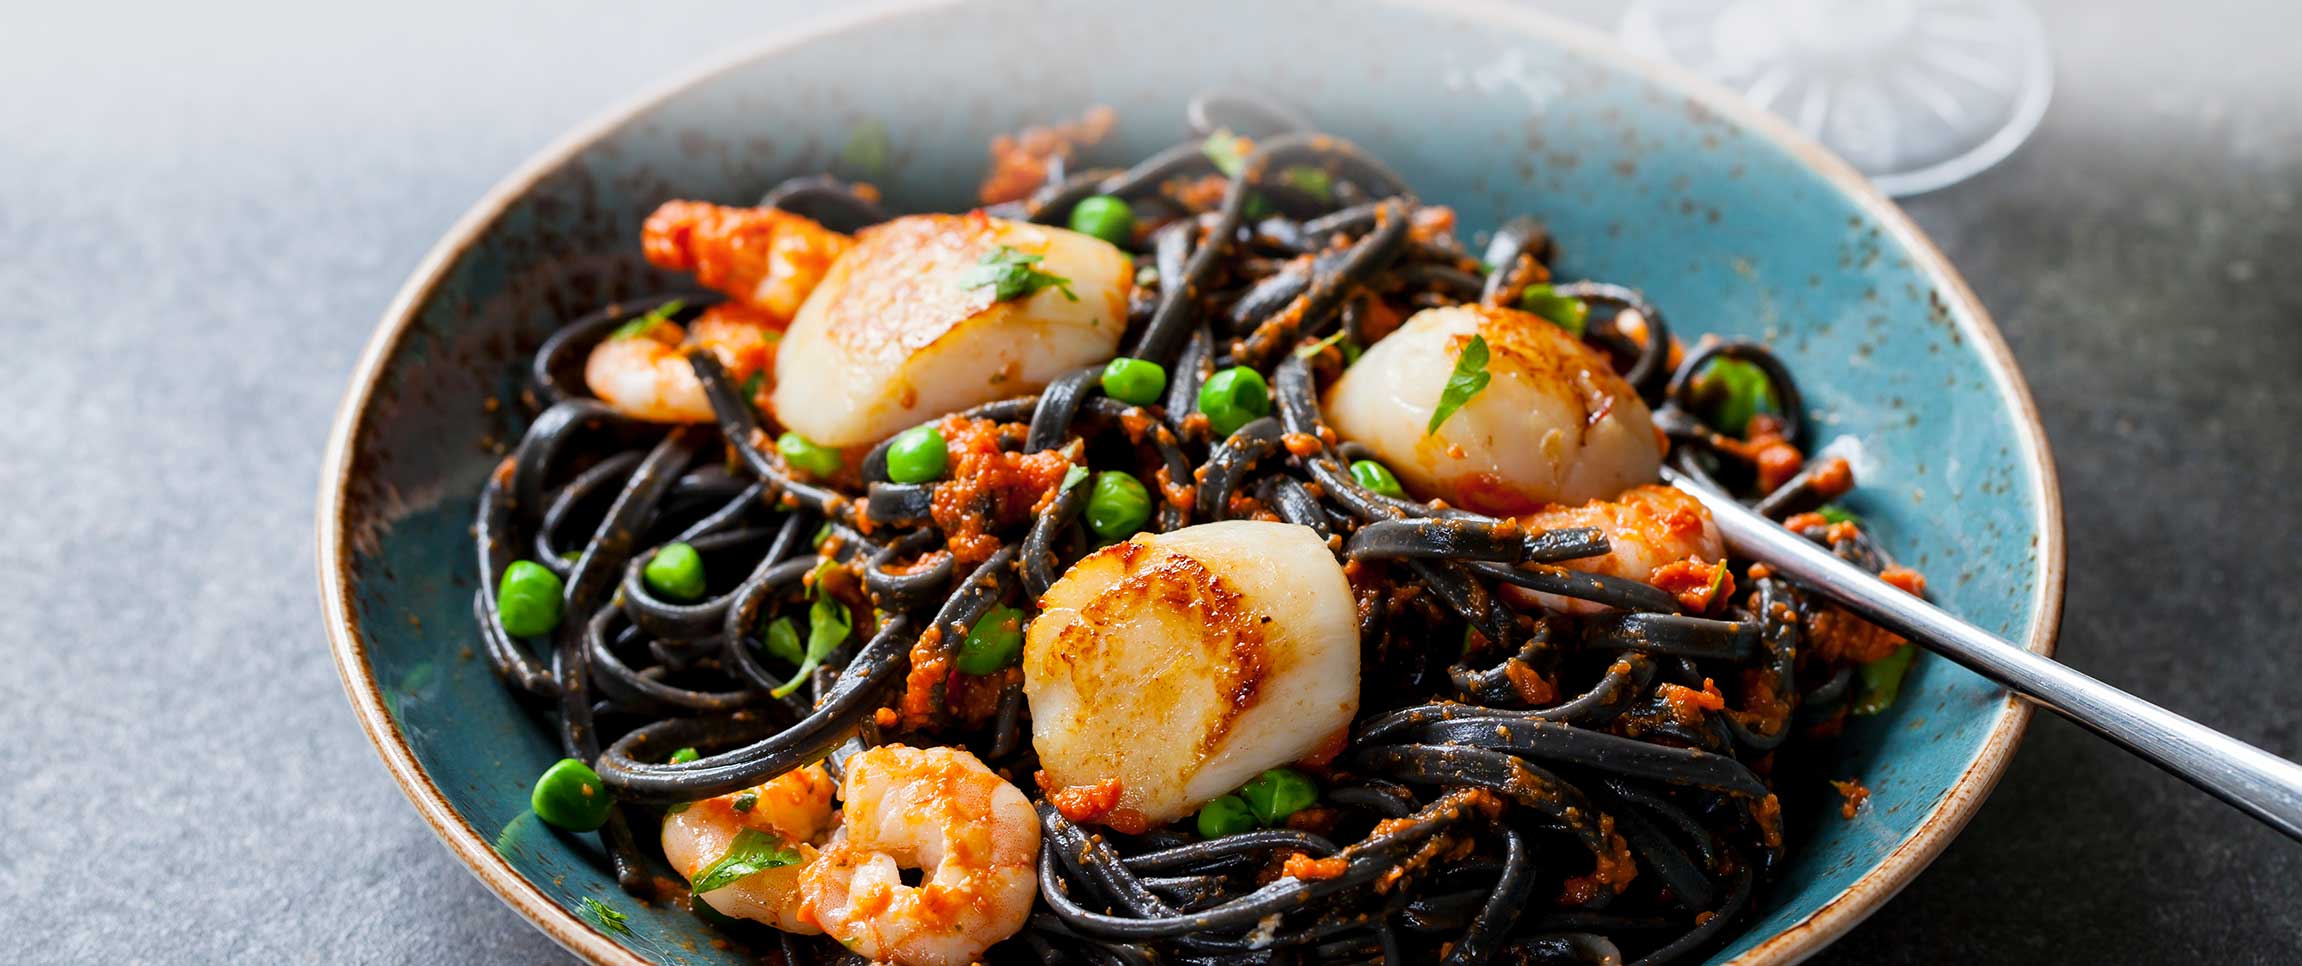 Scallops with Squid Ink Pasta